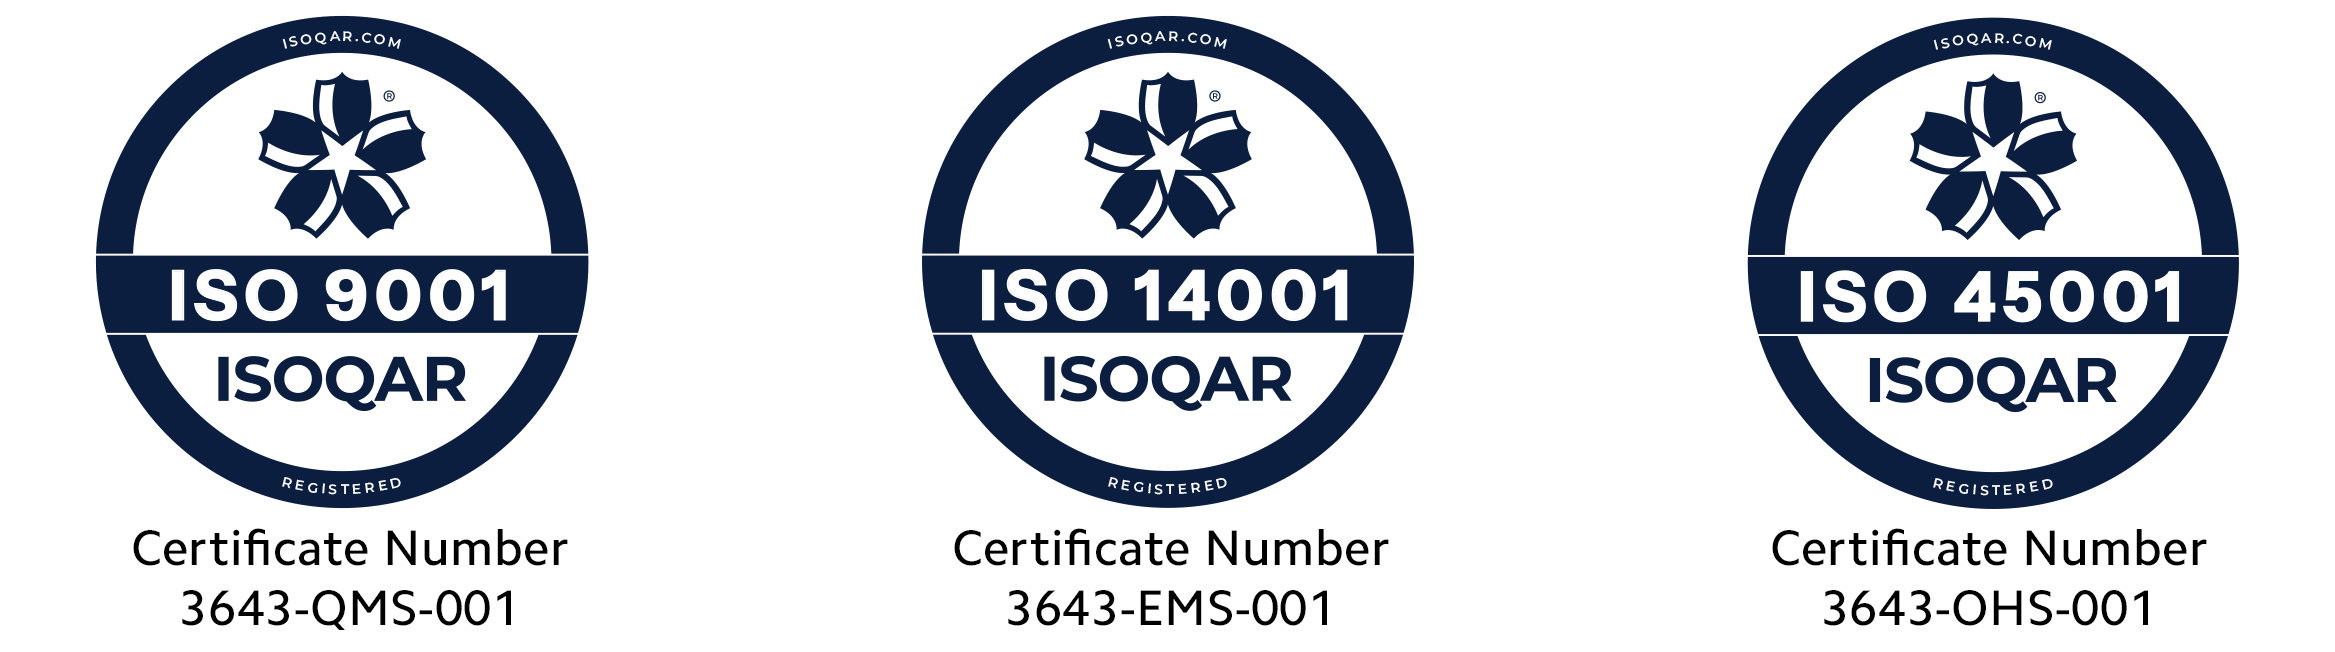 Iso Certificates Updated